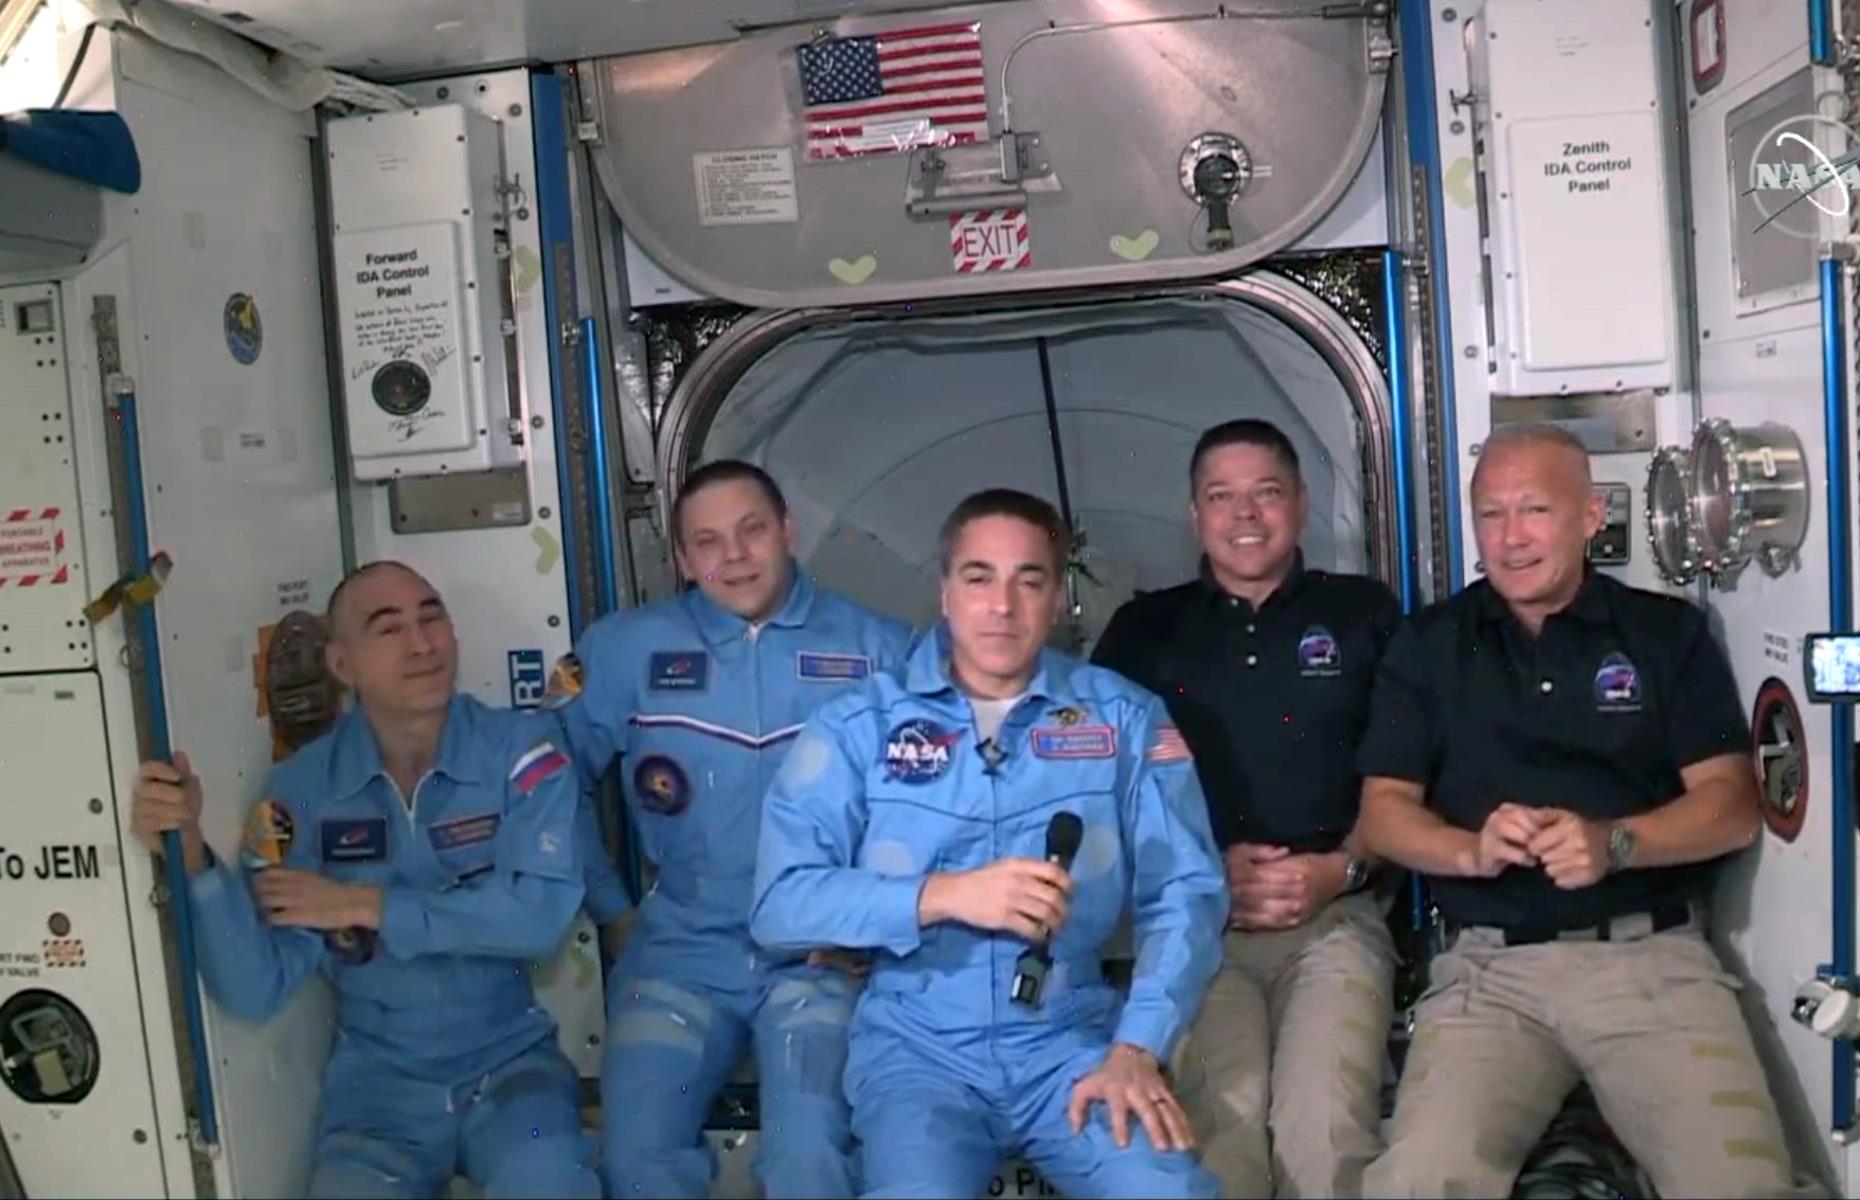 <p>Musk had more success this year, when SpaceX worked with NASA to send a team of astronauts to the International Space Station on 31 May. Doug Hurley (right) and Bob Behnken (second right) joined NASA astronaut Chris Cassidy (centre) and Russian cosmonauts Anatoly Ivanishin (left) and Ivan Vagner (second left) 19 hours after the SpaceX Falcon 9 rocket blasted off from Kennedy Space Center. The two astronauts then travelled in the Crew Dragon spacecraft to the Space Station. The mission's equipment was supplied and operated by SpaceX, in what was the first time NASA worked with a commercial partner rather than use its own aircraft, which it retired nine years ago.</p>